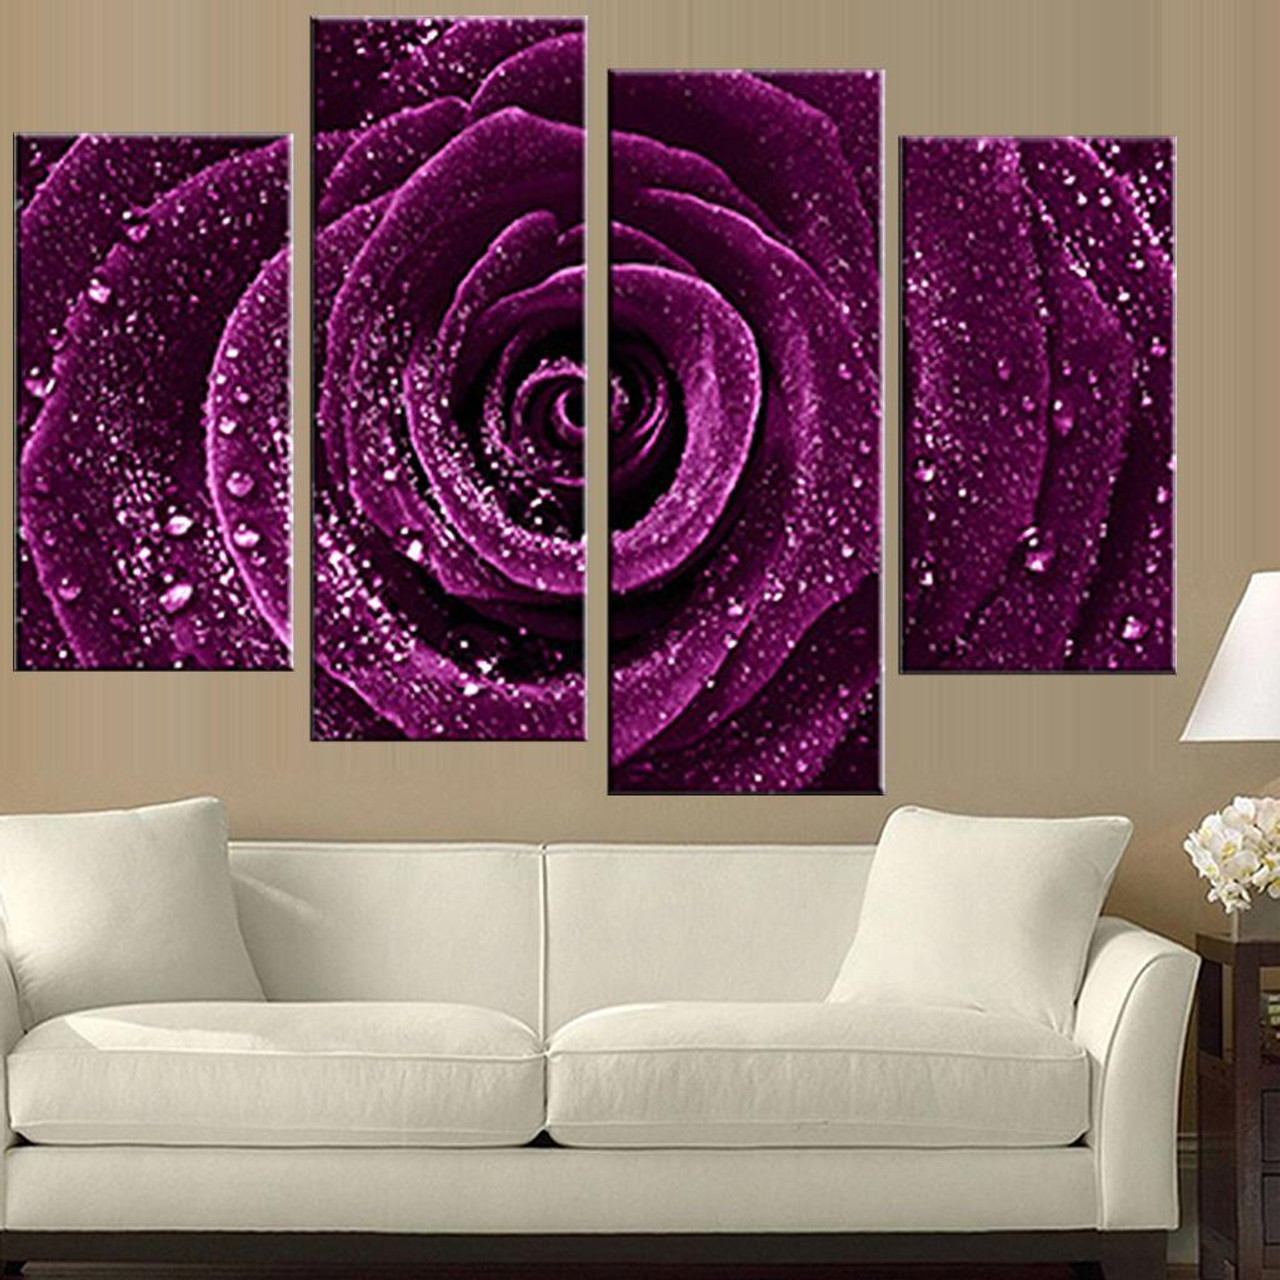 4 Pcs Set Combined Flower Paintings Purple Rose Modern Wall Painting